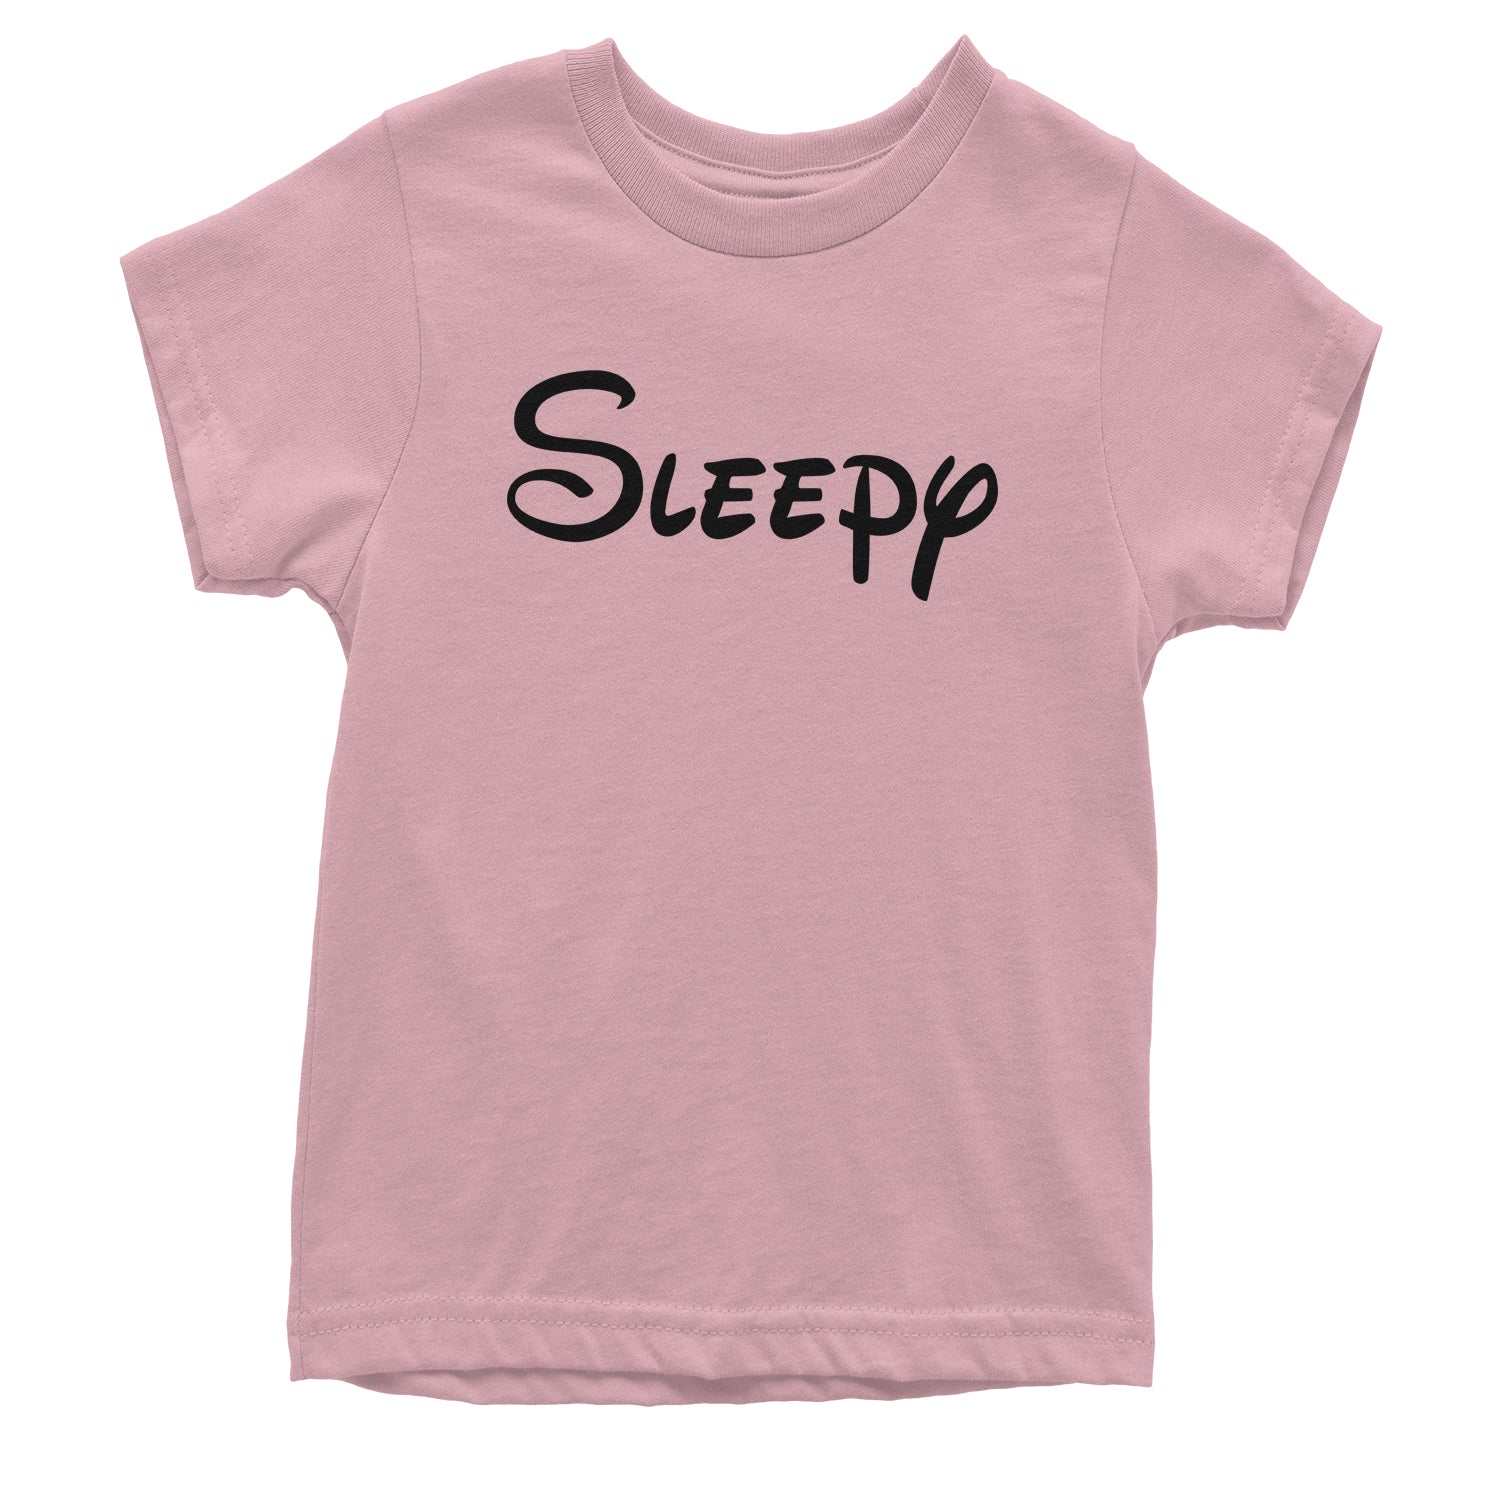 Sleepy - 7 Dwarfs Costume Youth T-shirt and, costume, dwarfs, group, halloween, matching, seven, snow, the, white by Expression Tees